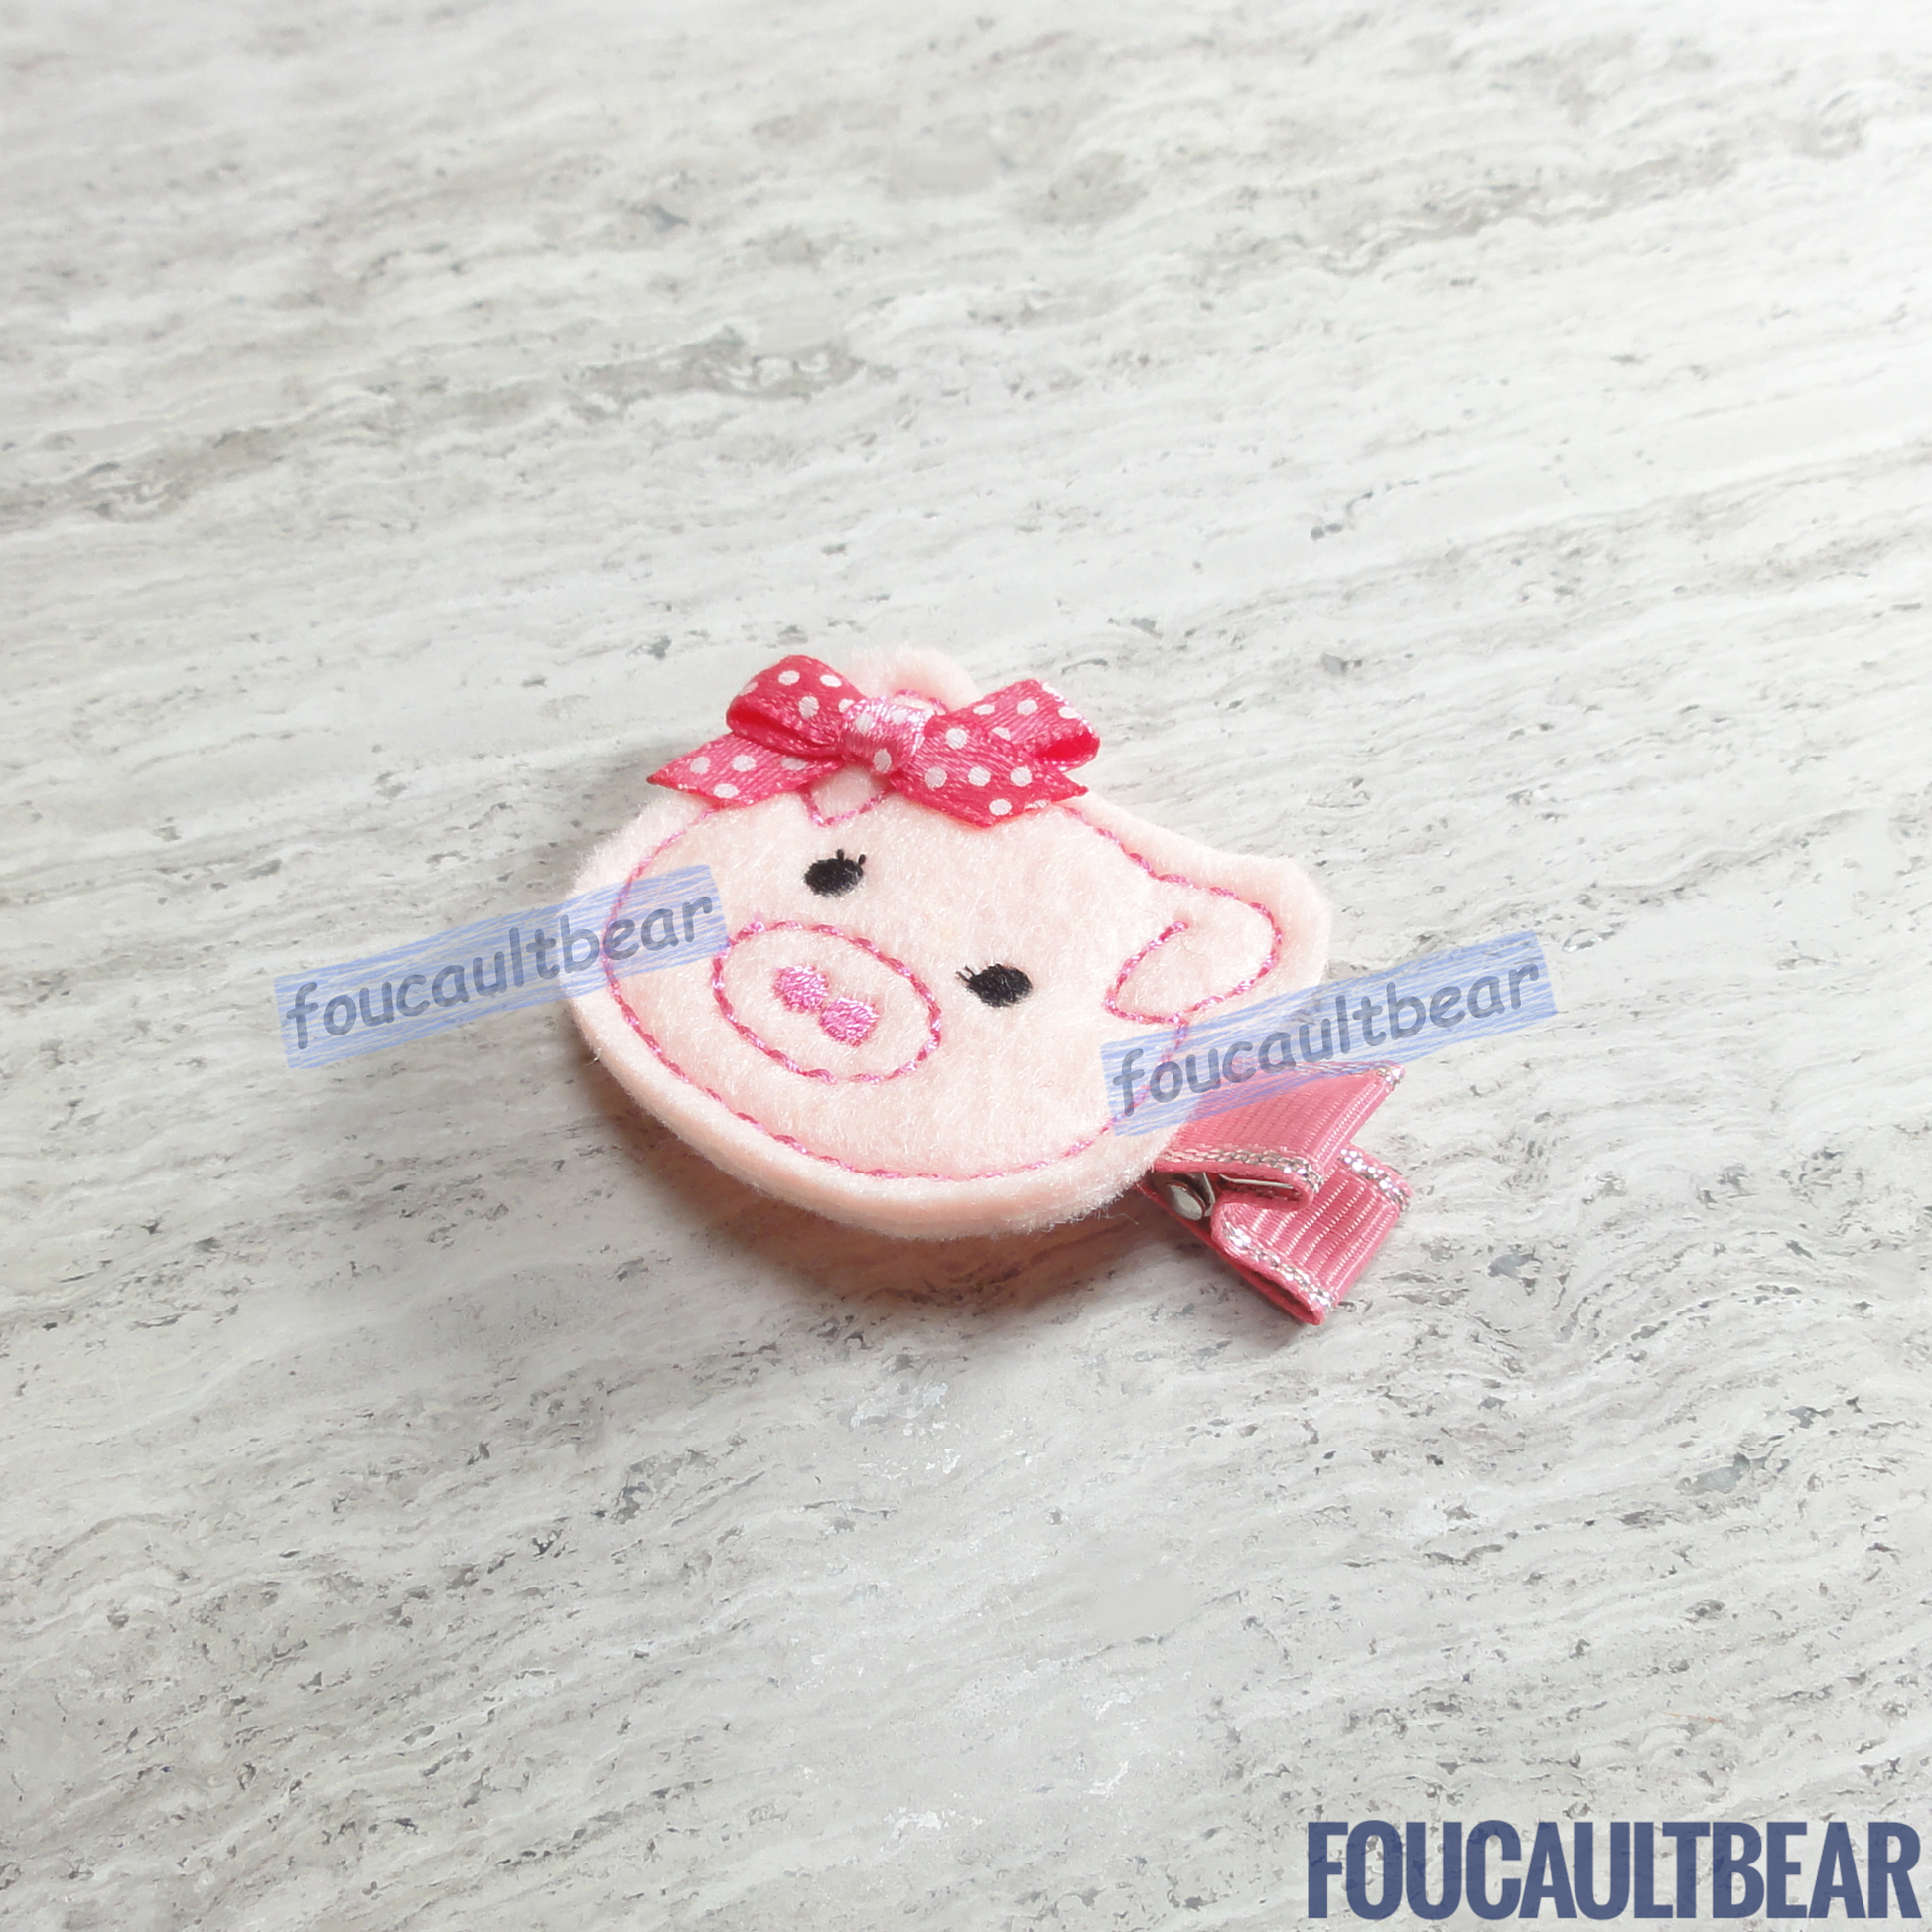 Foucaultbear's HANDMADE HAIR CLIPPIE. Little Pink Mrs. Pig/ Miss Piggy. Embroidered Soft Felt. Partially Lined Alligator Hair Clip. Super Pink Piggy Hair Clippie. A nice addition to your little girl's wardrobe for Easter and whenever baby chicks are in style! Absolutely adorable on babies with enough hair to wear it too. Approximately 1 3/4 inches (4.5 cm) across. Attached with a 1 3/4 inch (4.5 cm) partially lined alligator clip.